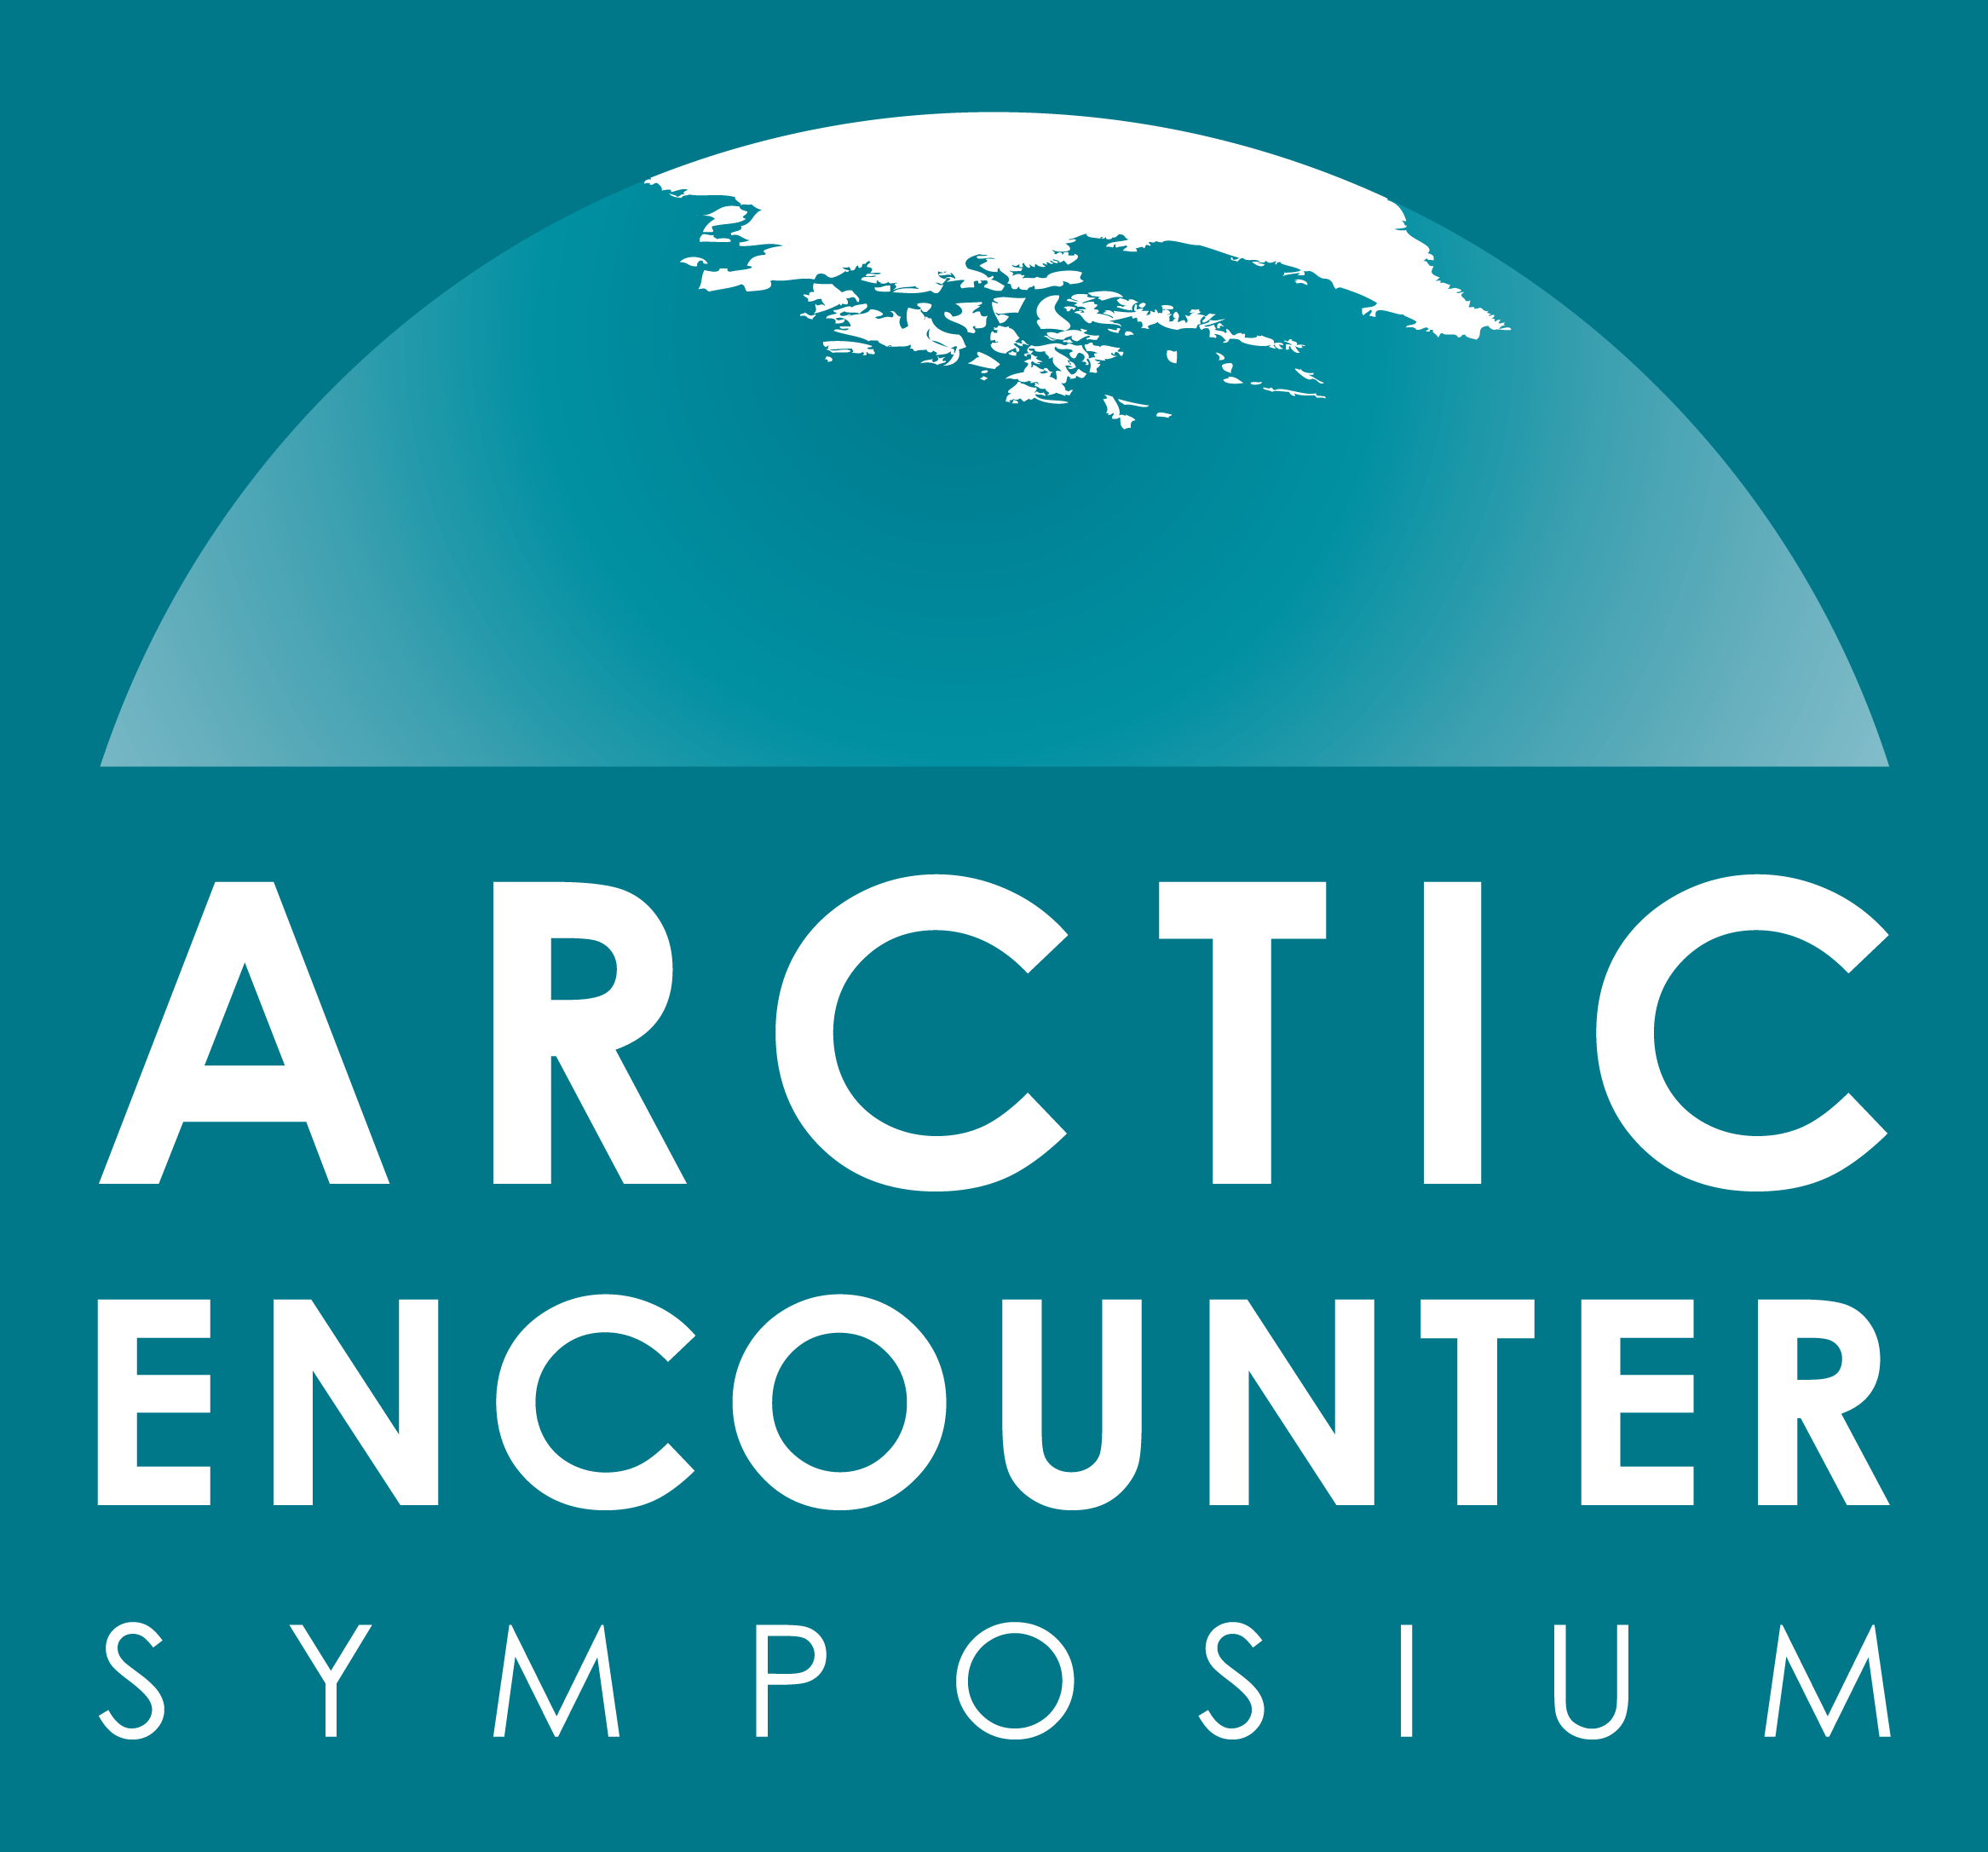 ACEP Researcher George Roe Attends Arctic Encounter Symposium in Seattle